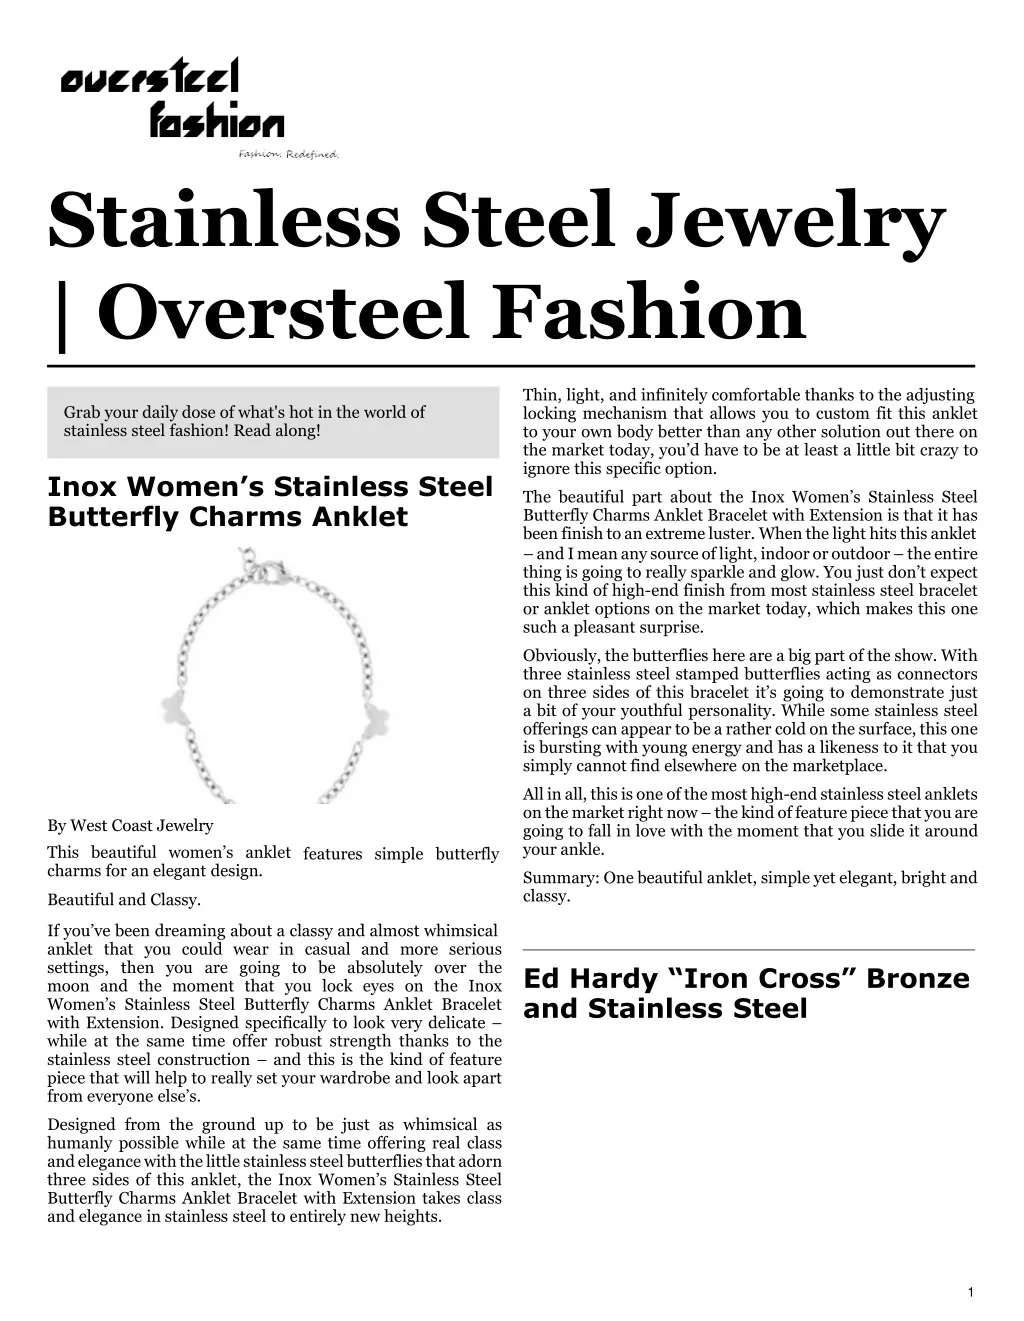 stainless steel jewelry oversteel fashion